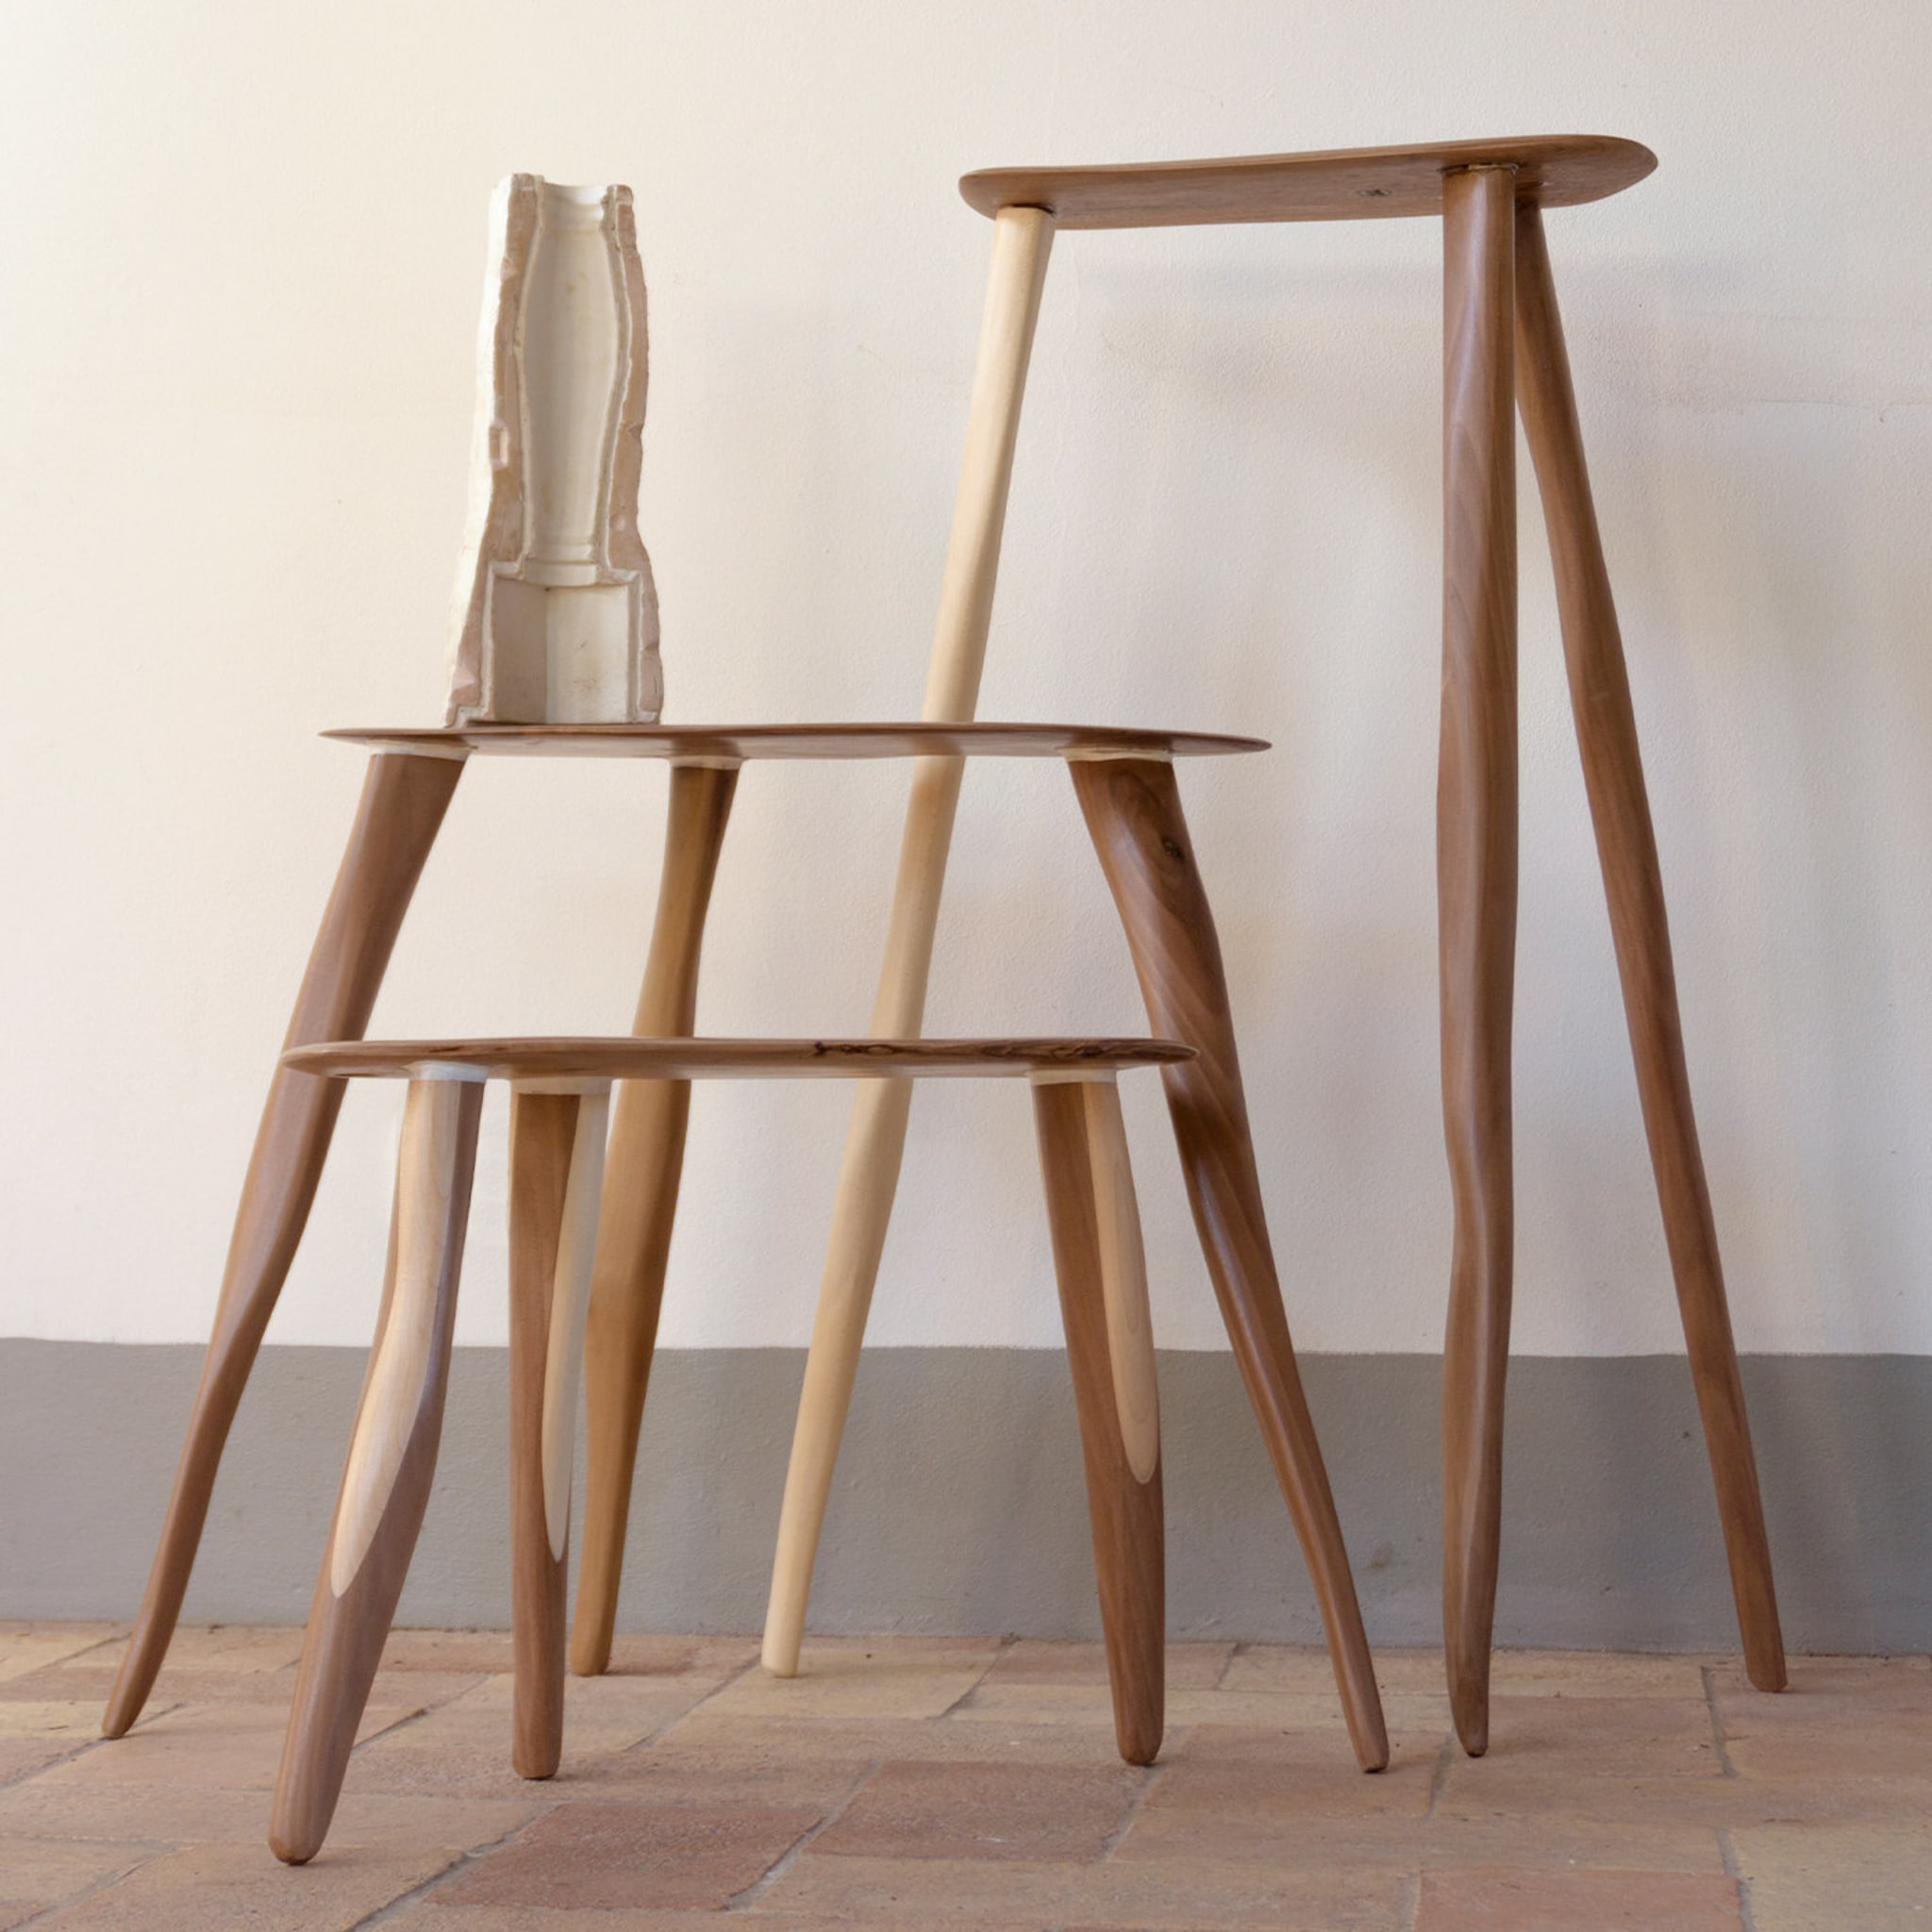 Unstable Set of 3 Side Tables - Alternative view 5